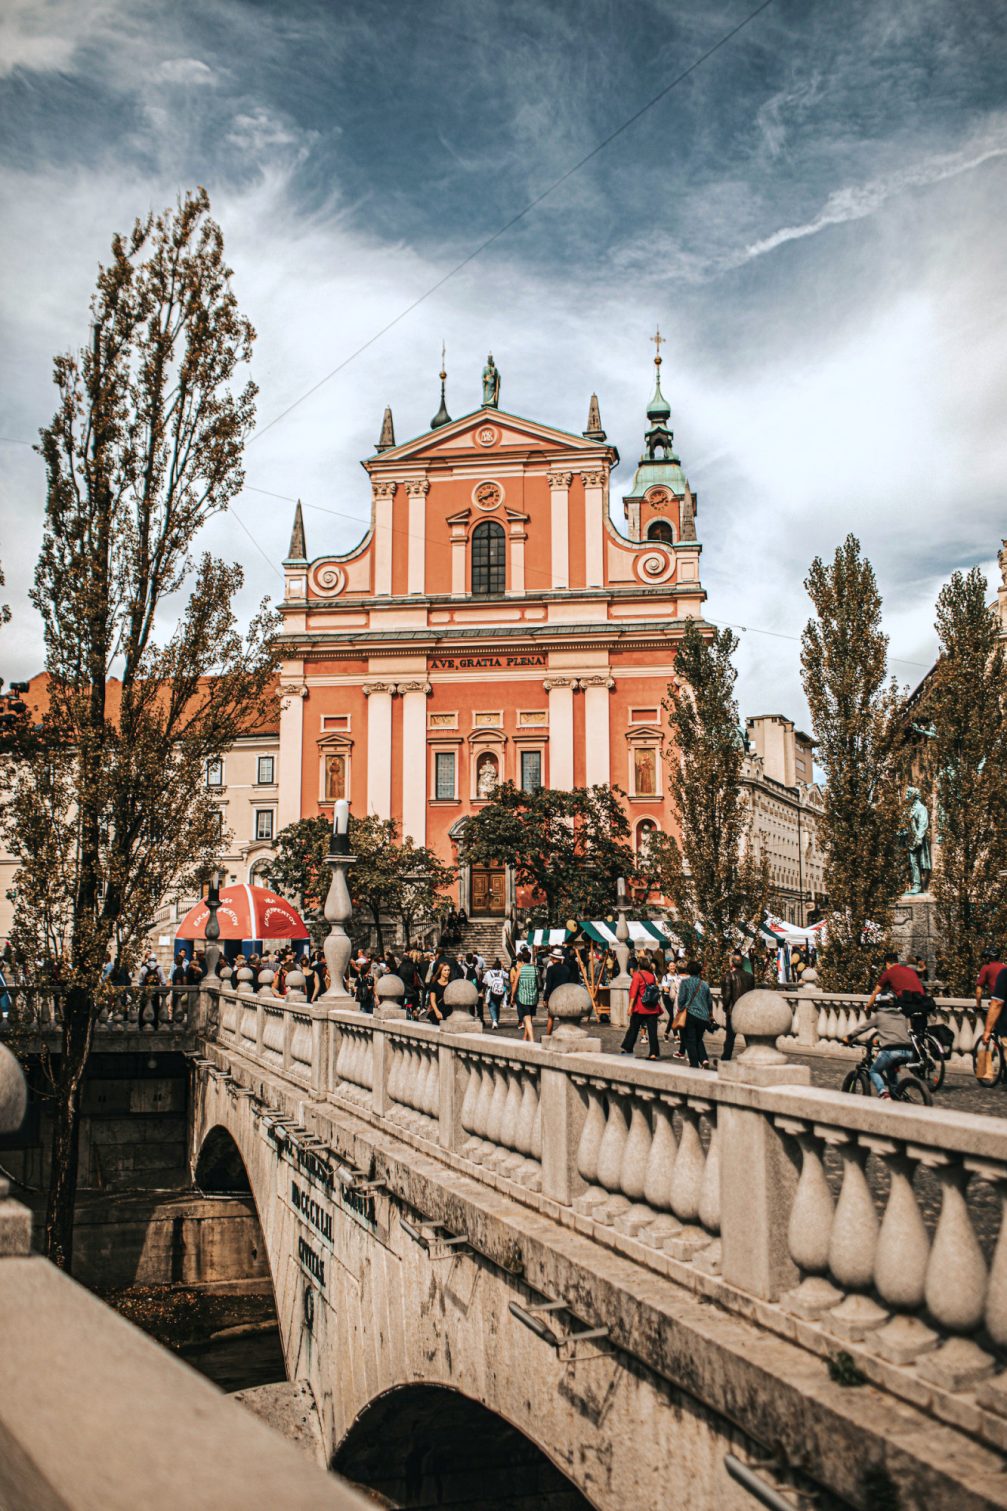 Triple Bridge in Ljubljana with the salmon pink Franciscan Church in the background